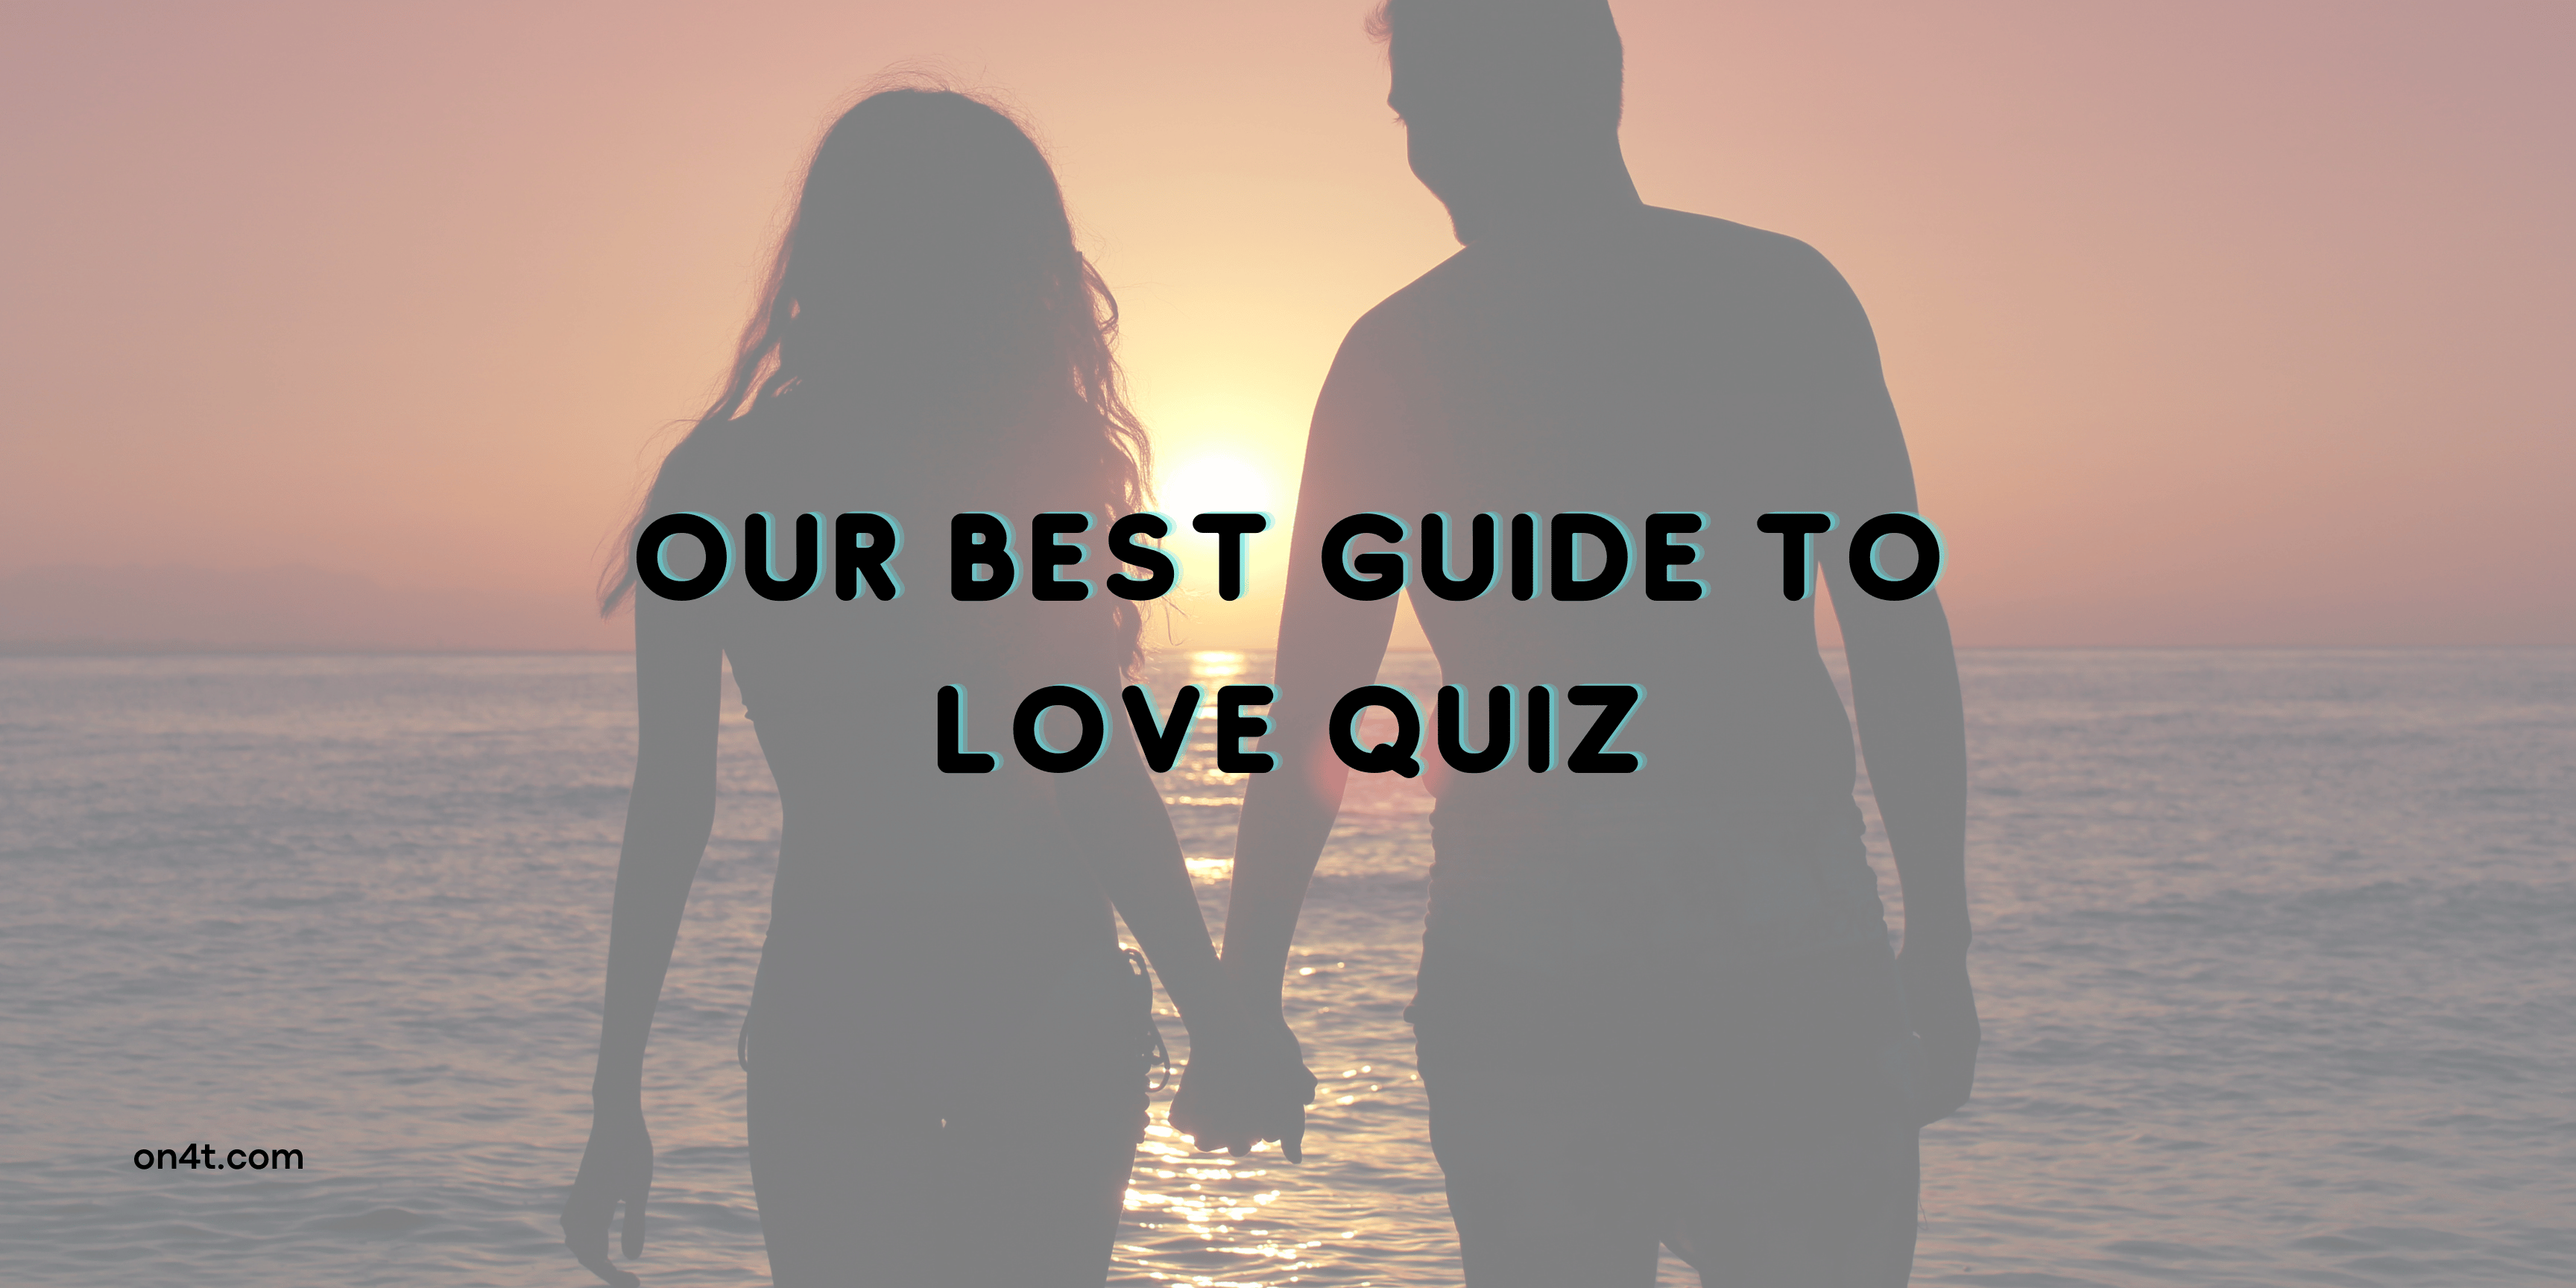 Our Best Guide to Love Quiz